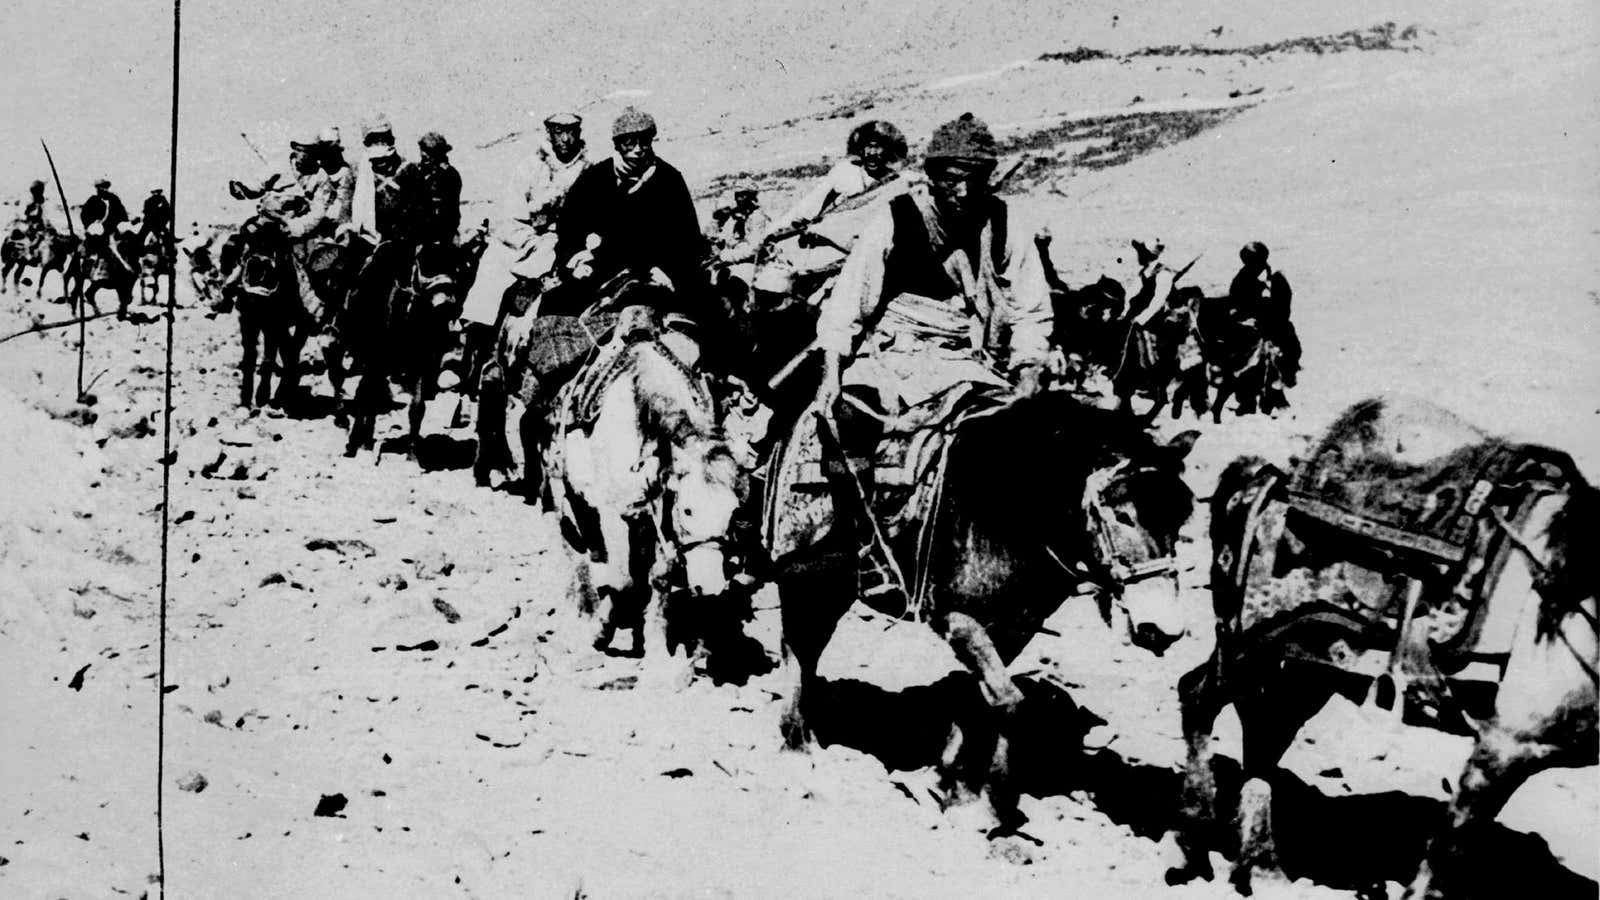 The 23-year-old Dalai Lama and his escape party is shown on the fourth day of their flight to freedom as they cross the Zsagola pass, in Southern Tibet, while being pursued by Chinese military forces, on March 21, 1959, after fleeing Lhasa.